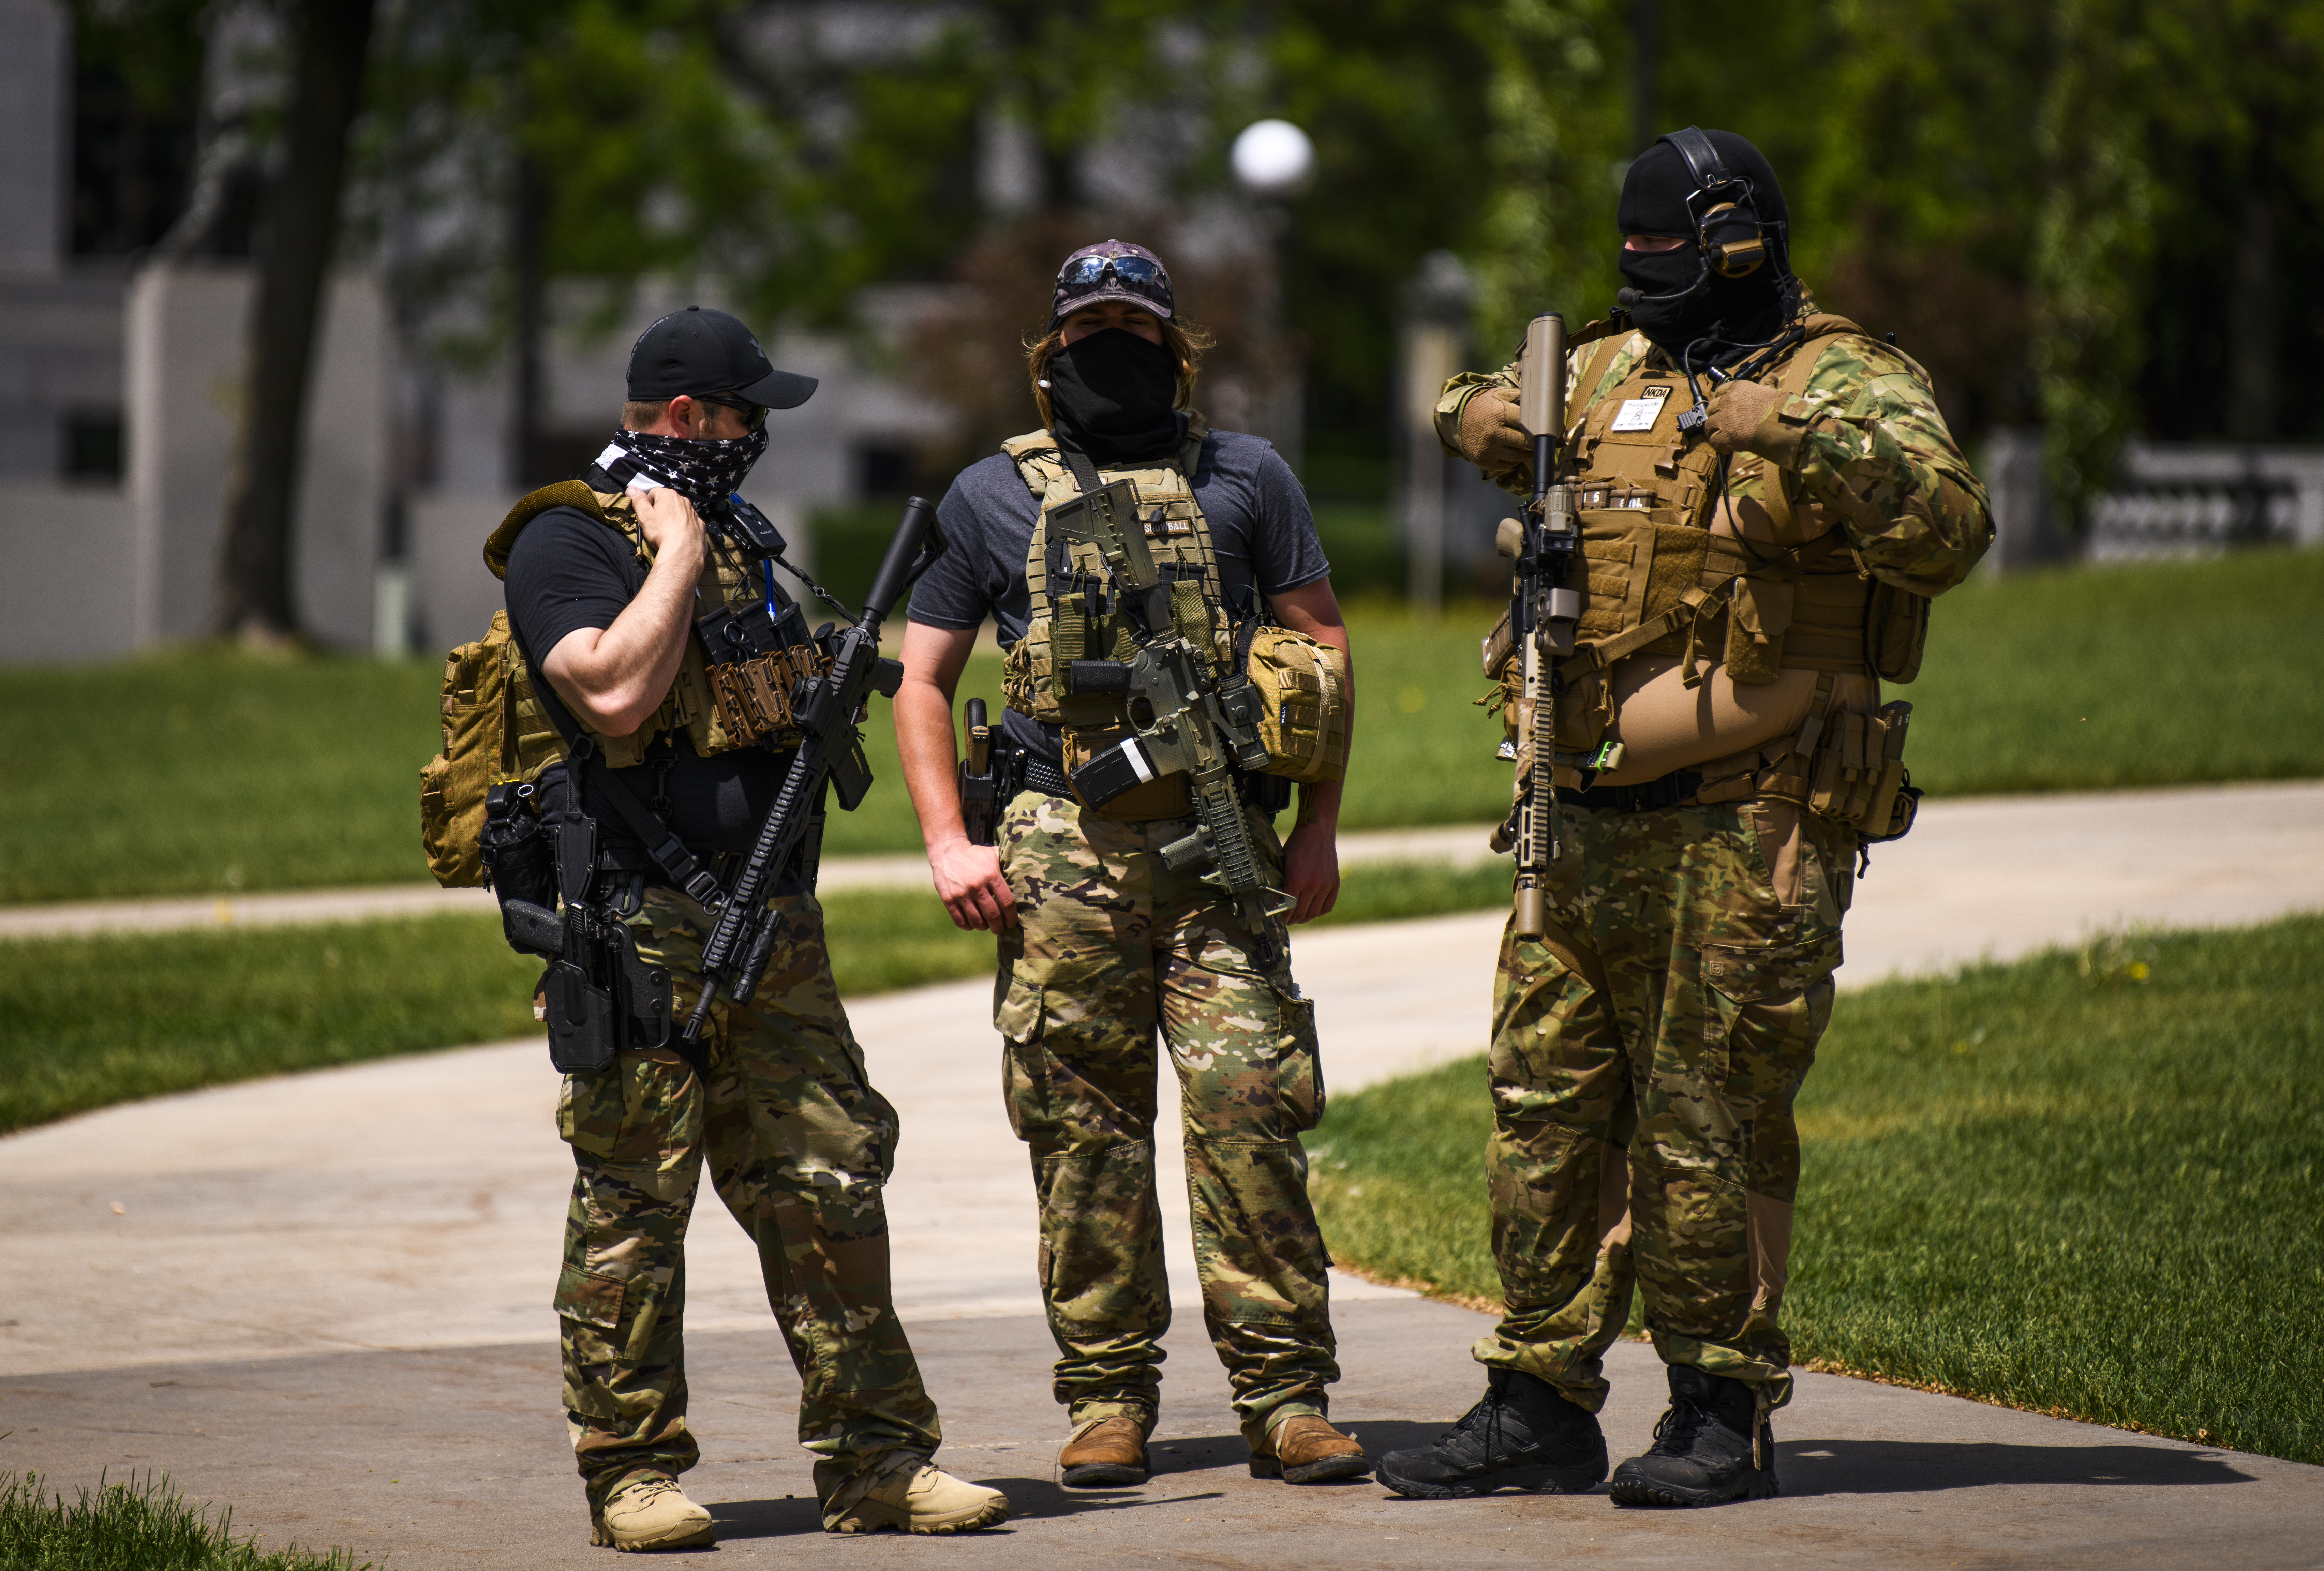 Three people in camouflage clothing stand with rifles and other gear in their hands and slung on their shoulders.